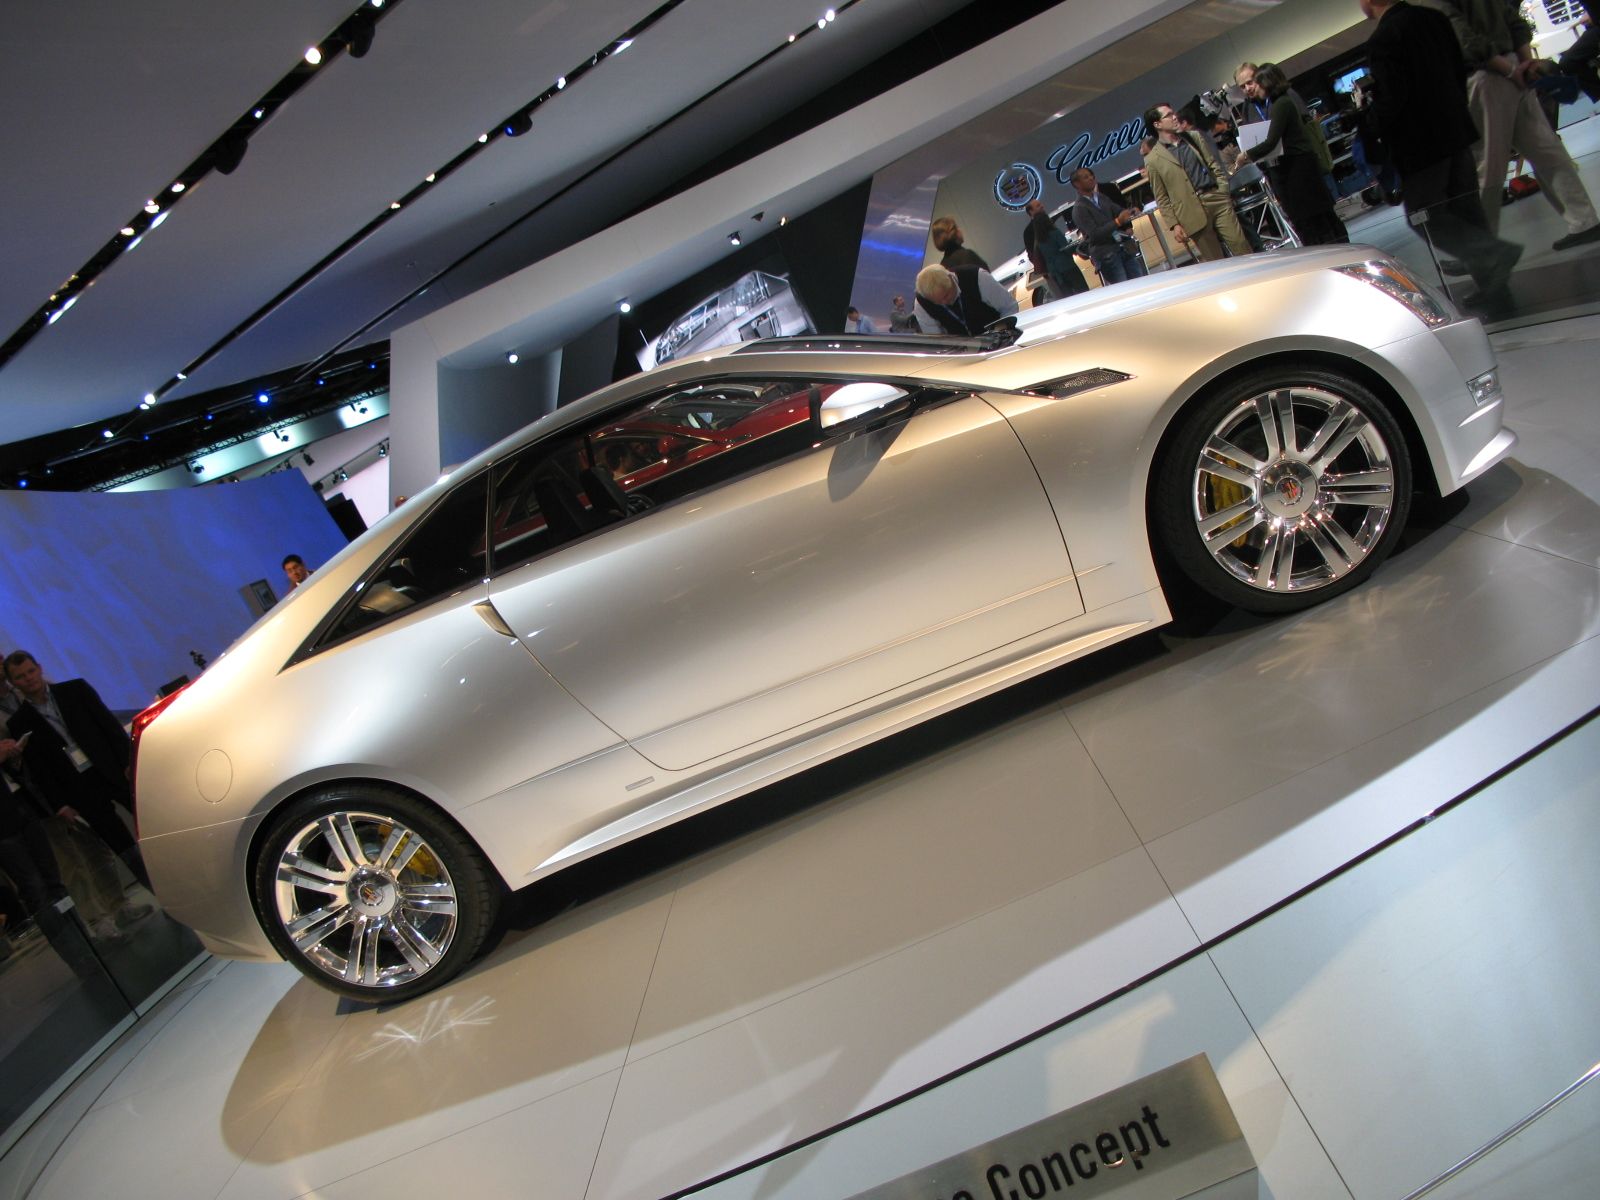 2008 Cadillac CTS Coupe Concept